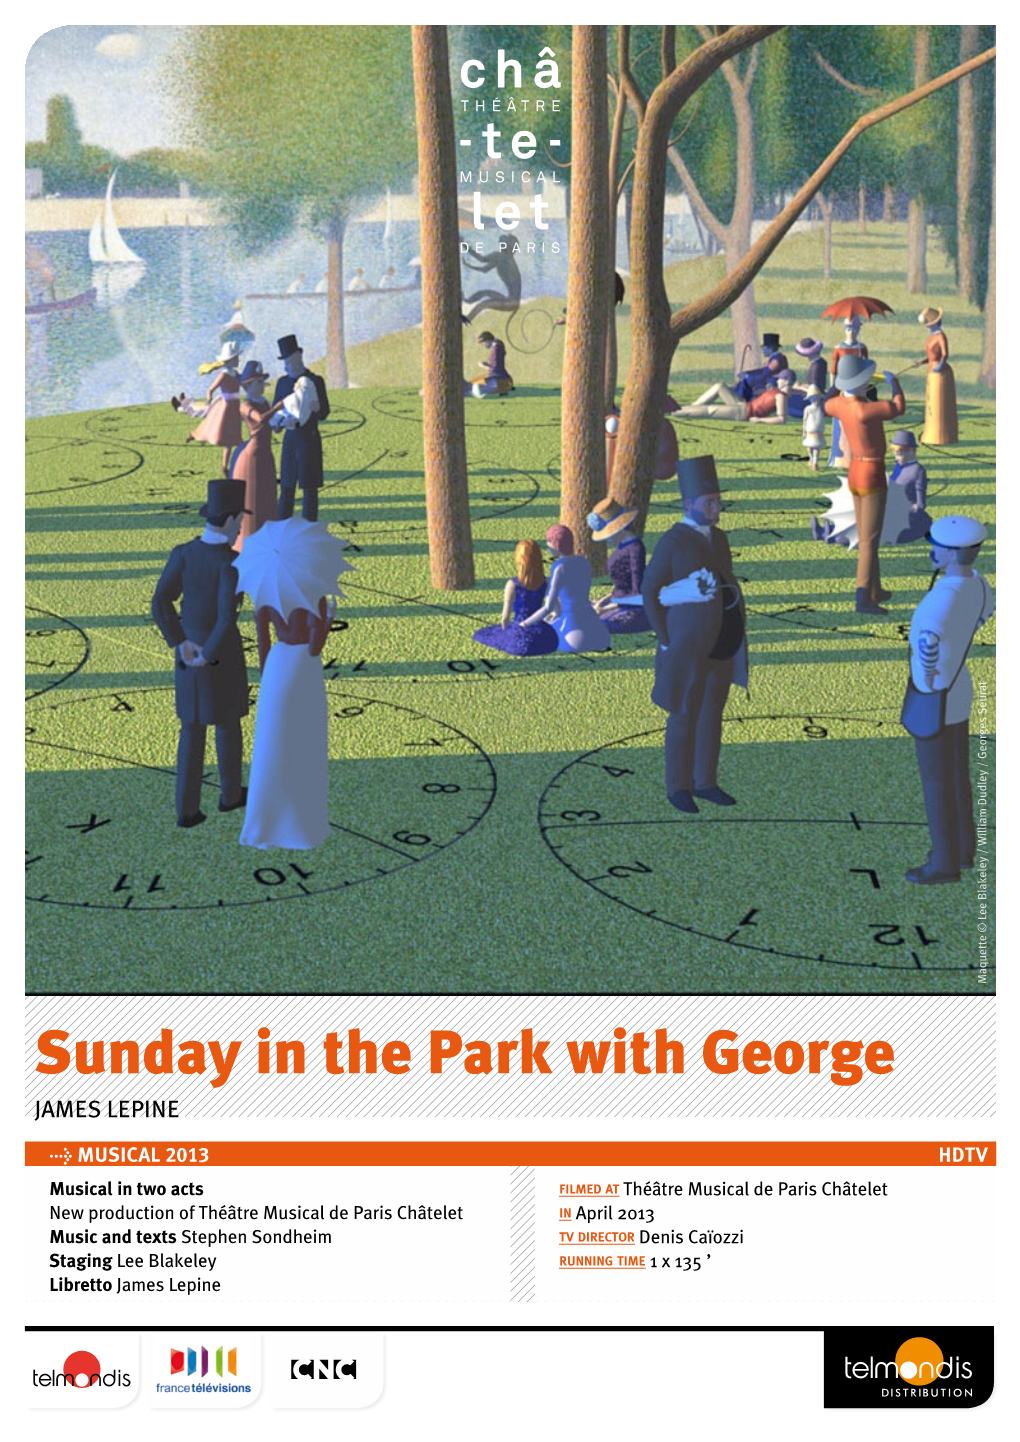 Sunday in the Park with George JAMES LEPINE